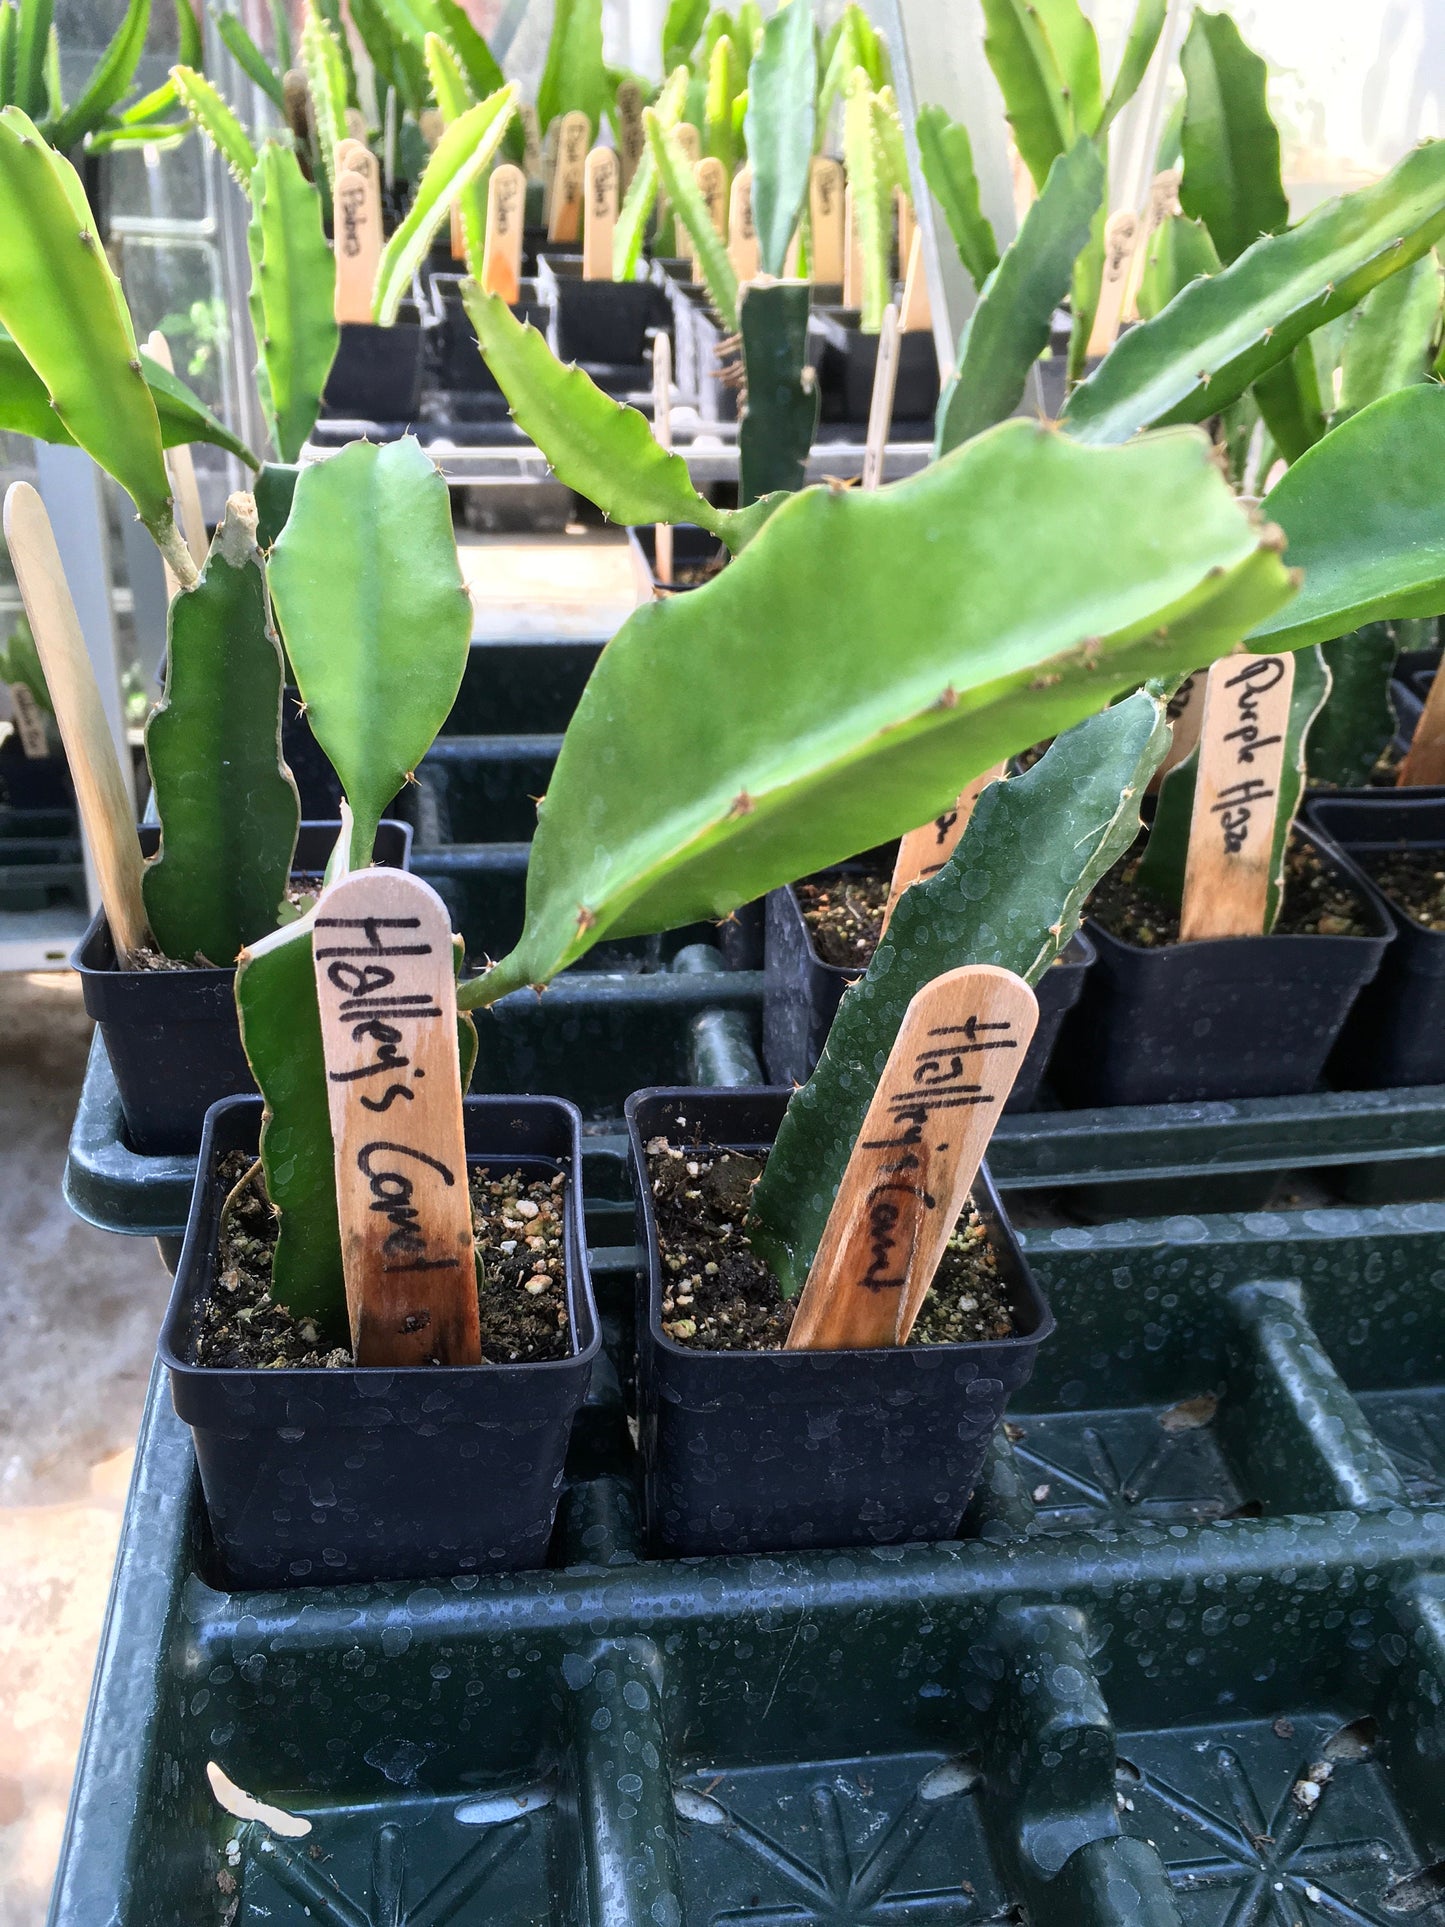 4 Combo Dragon Fruit ROOTED Plants-Lisa, AX, Halley’s Comet, Condor